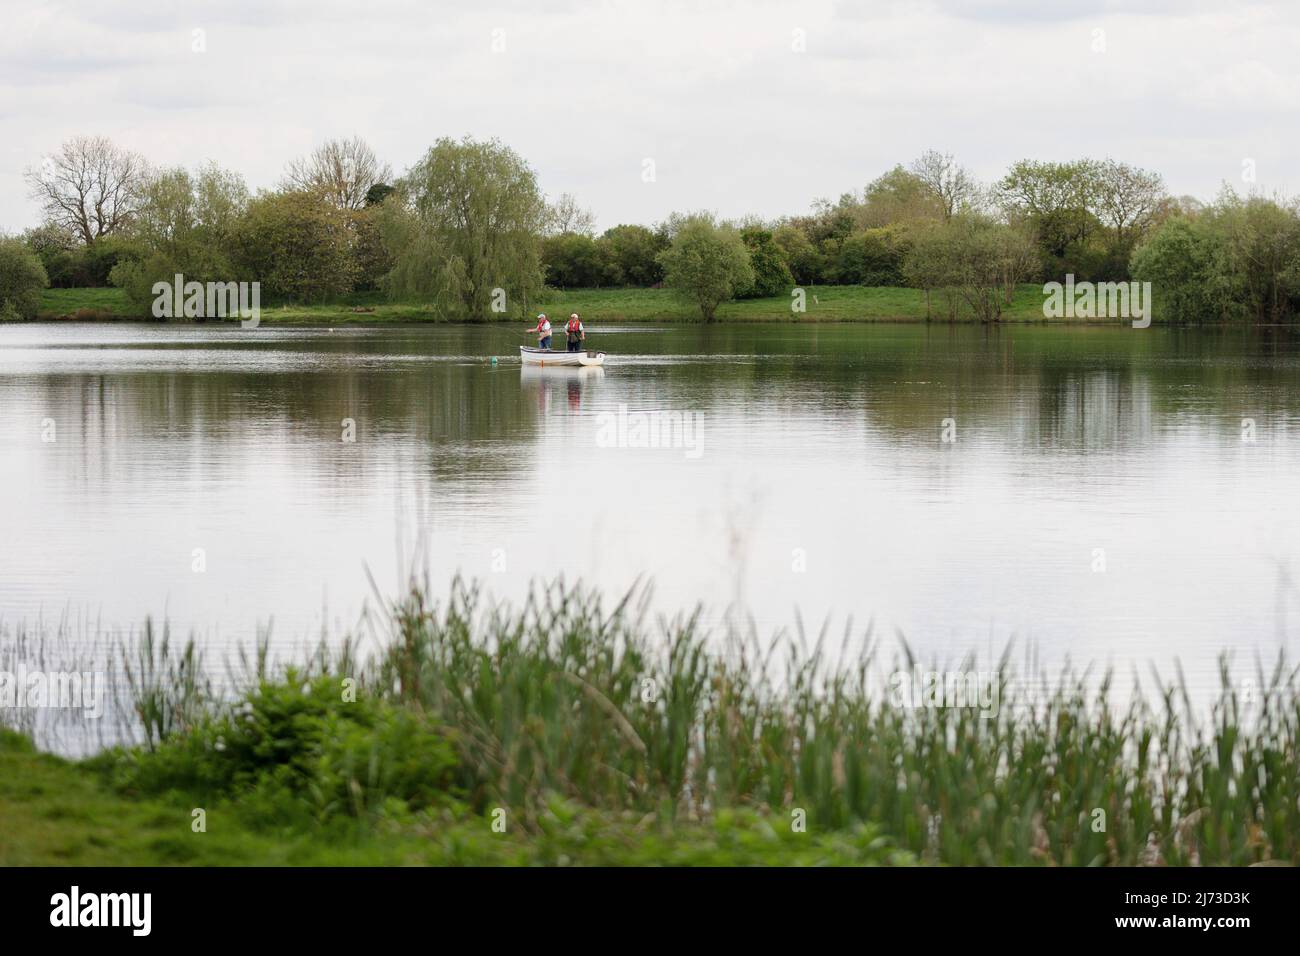 Two male anglers standing up and casting off a line / going fishing in a small rowing boat in the middle of a lake / water, UK Stock Photo